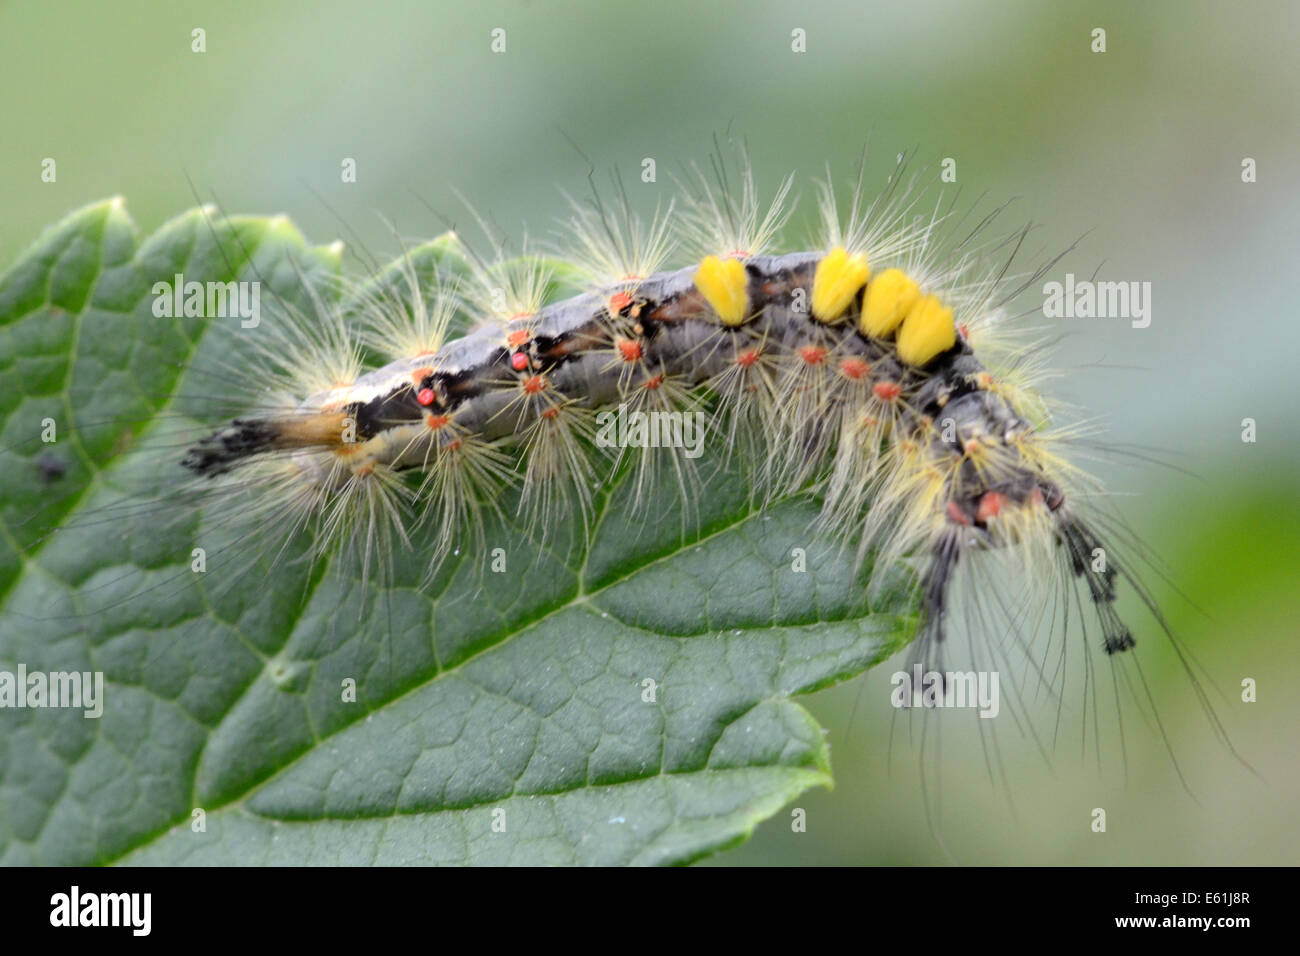 Rusty tussock moth caterpillar (Orgyia antiqua) on red currant leaf Stock Photo